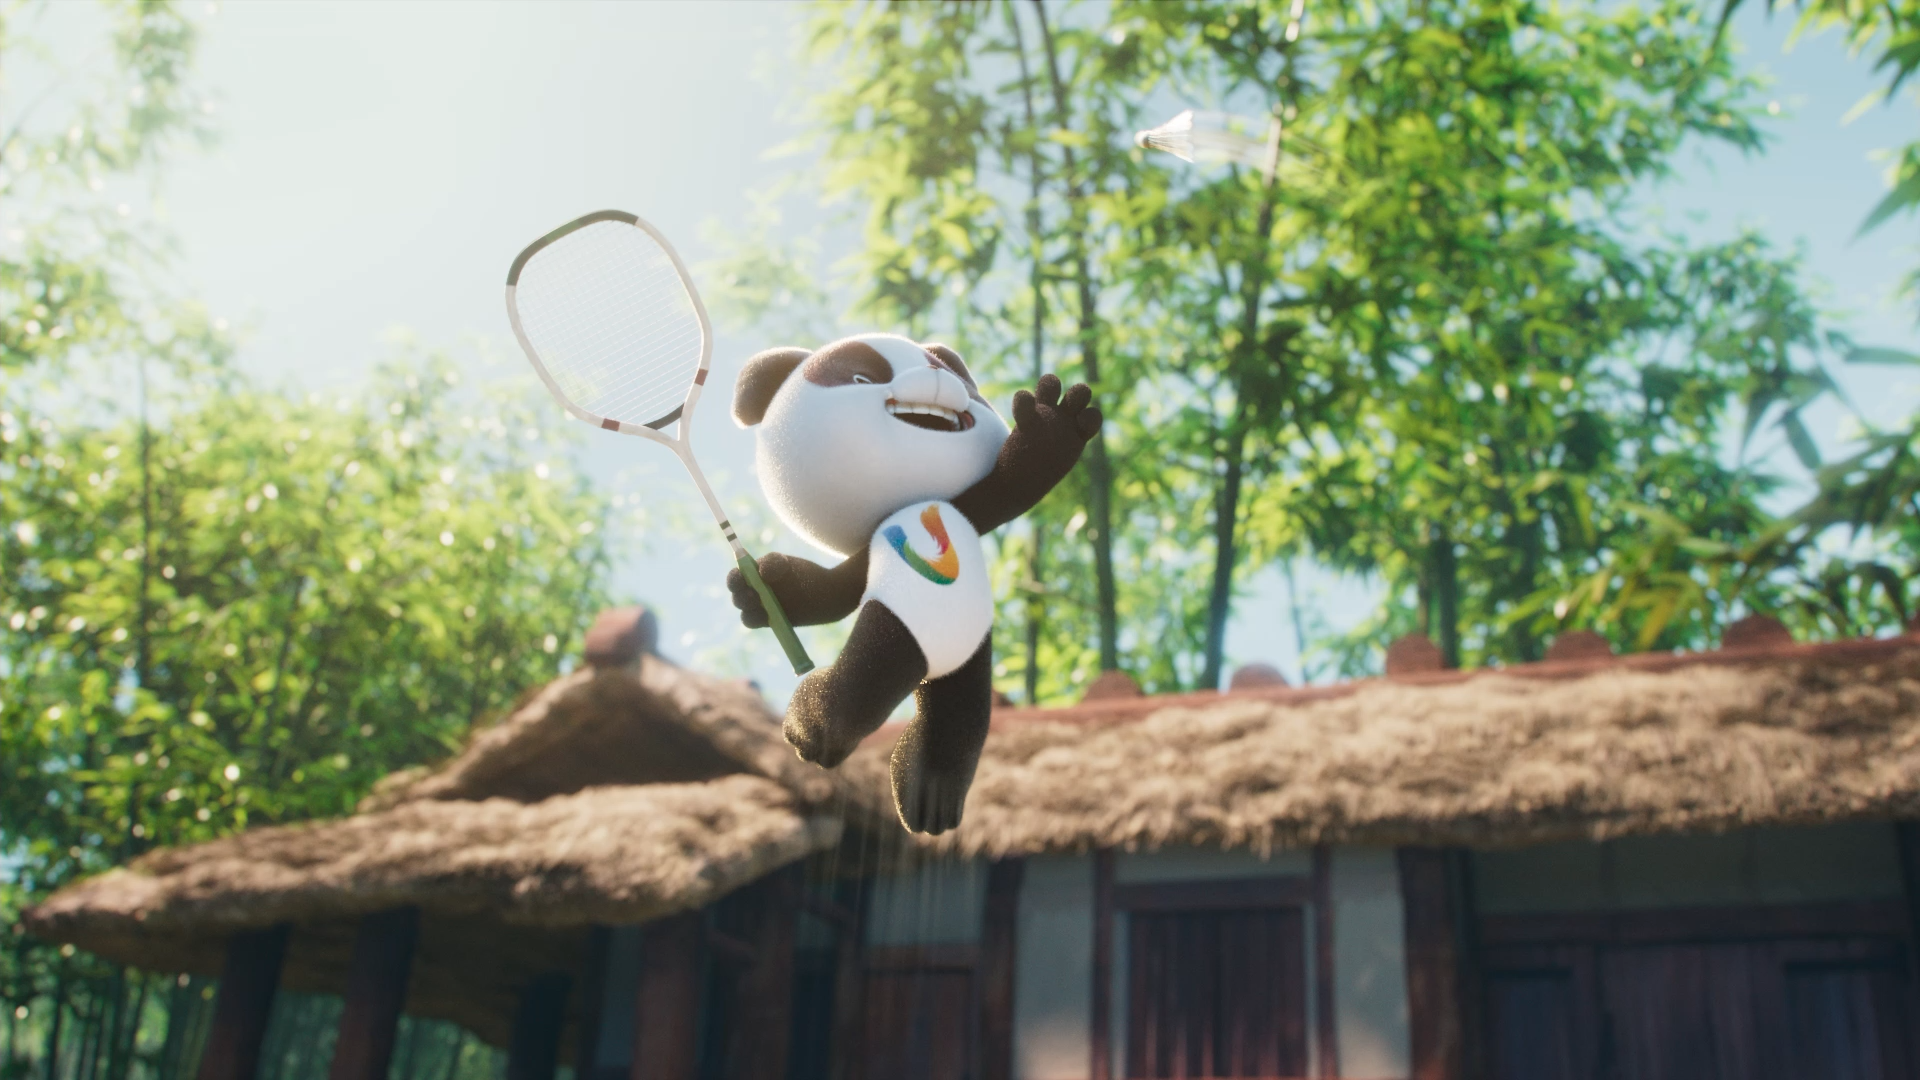 The Chengdu 2021 mascot Rongbao, who it is said to symbolise the spirit and courage of youth, stars in a new video released to coincide with the Lantern Festival ©FISU